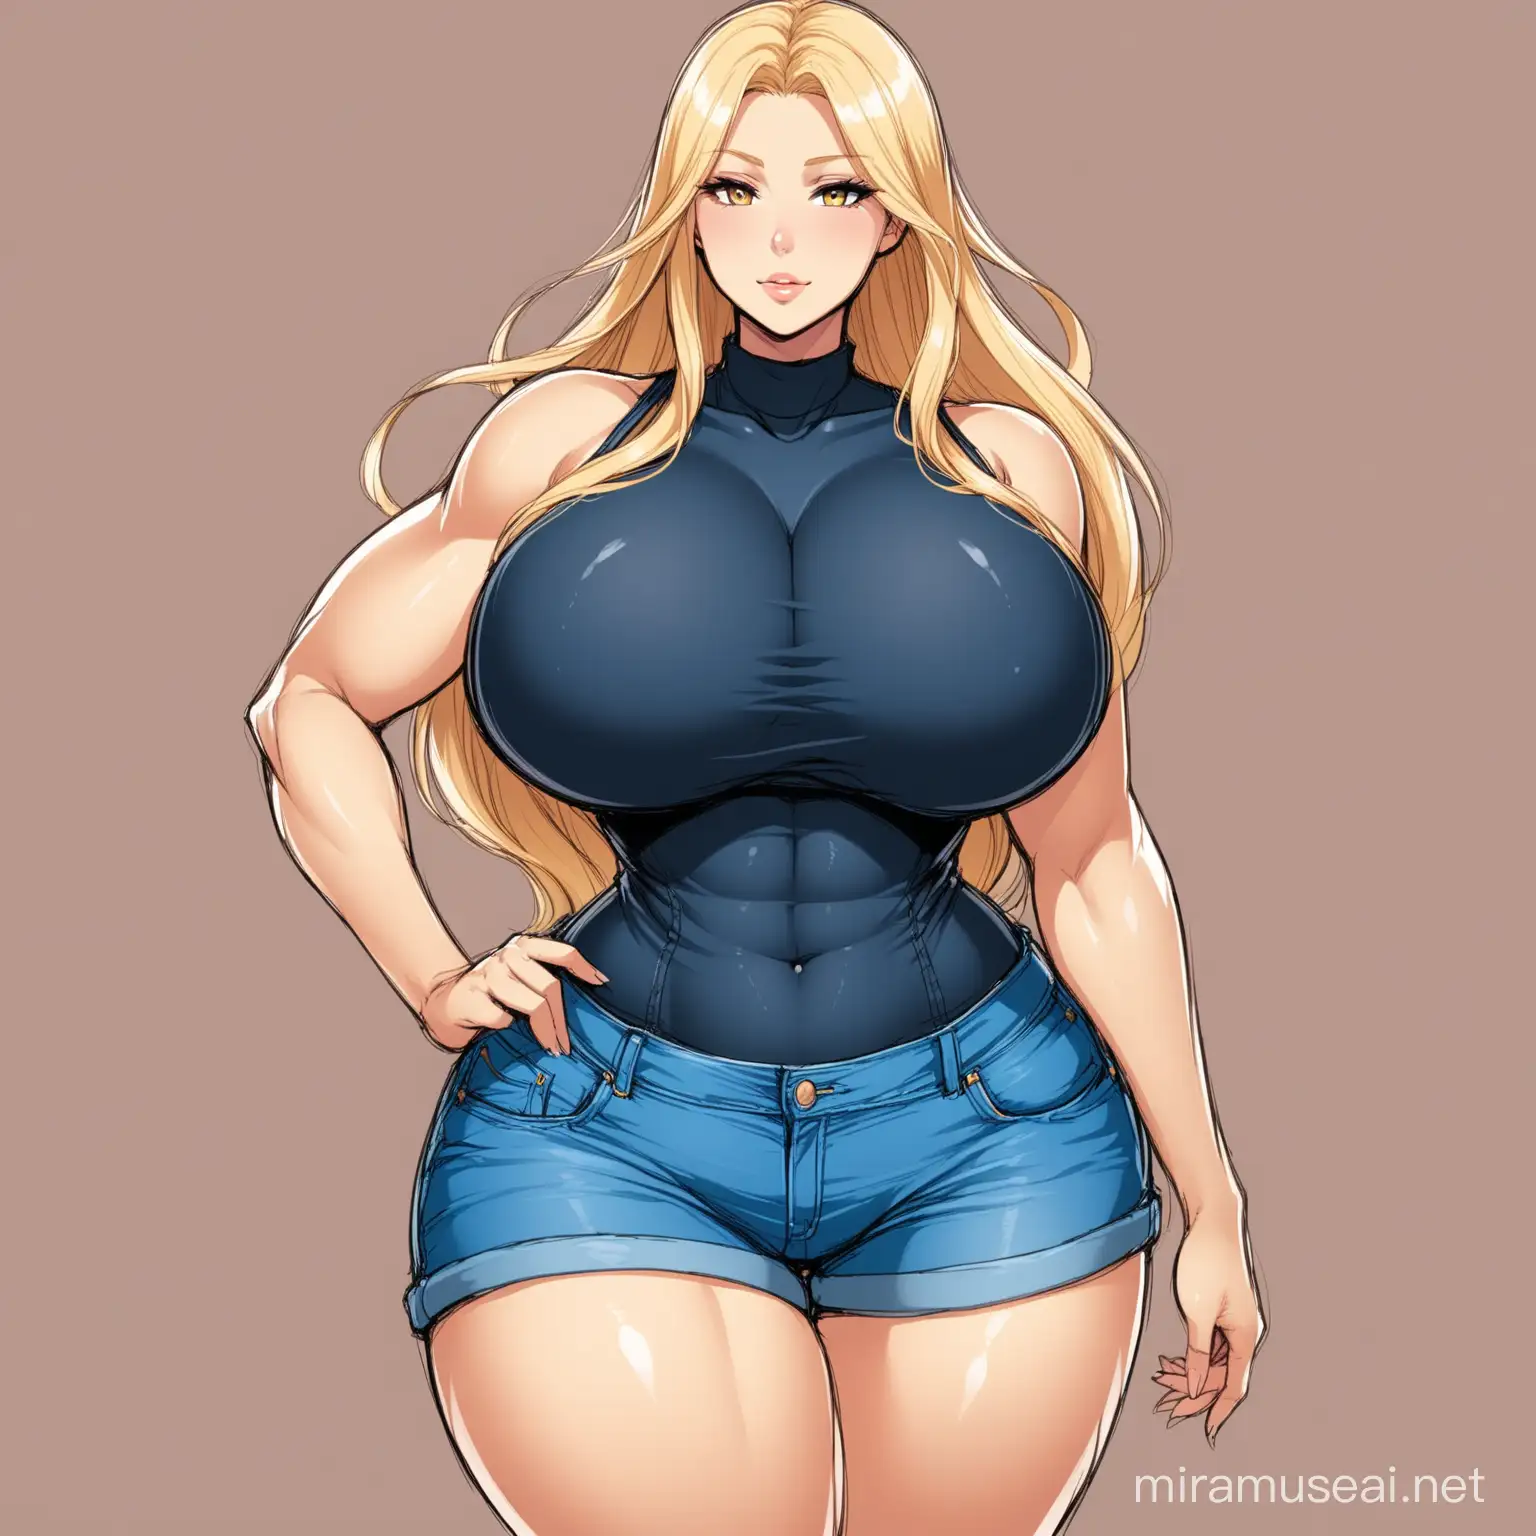 Full color drawing of a blond woman with long, blond hair, a beautiful, delicate face, huge chest, extremely large chest, enormous chest, colossal chest, very thin waist, extremely thin waist, wearing casual clothing, including a top and jean shorts. Emphasize her immense chest, her massive chest